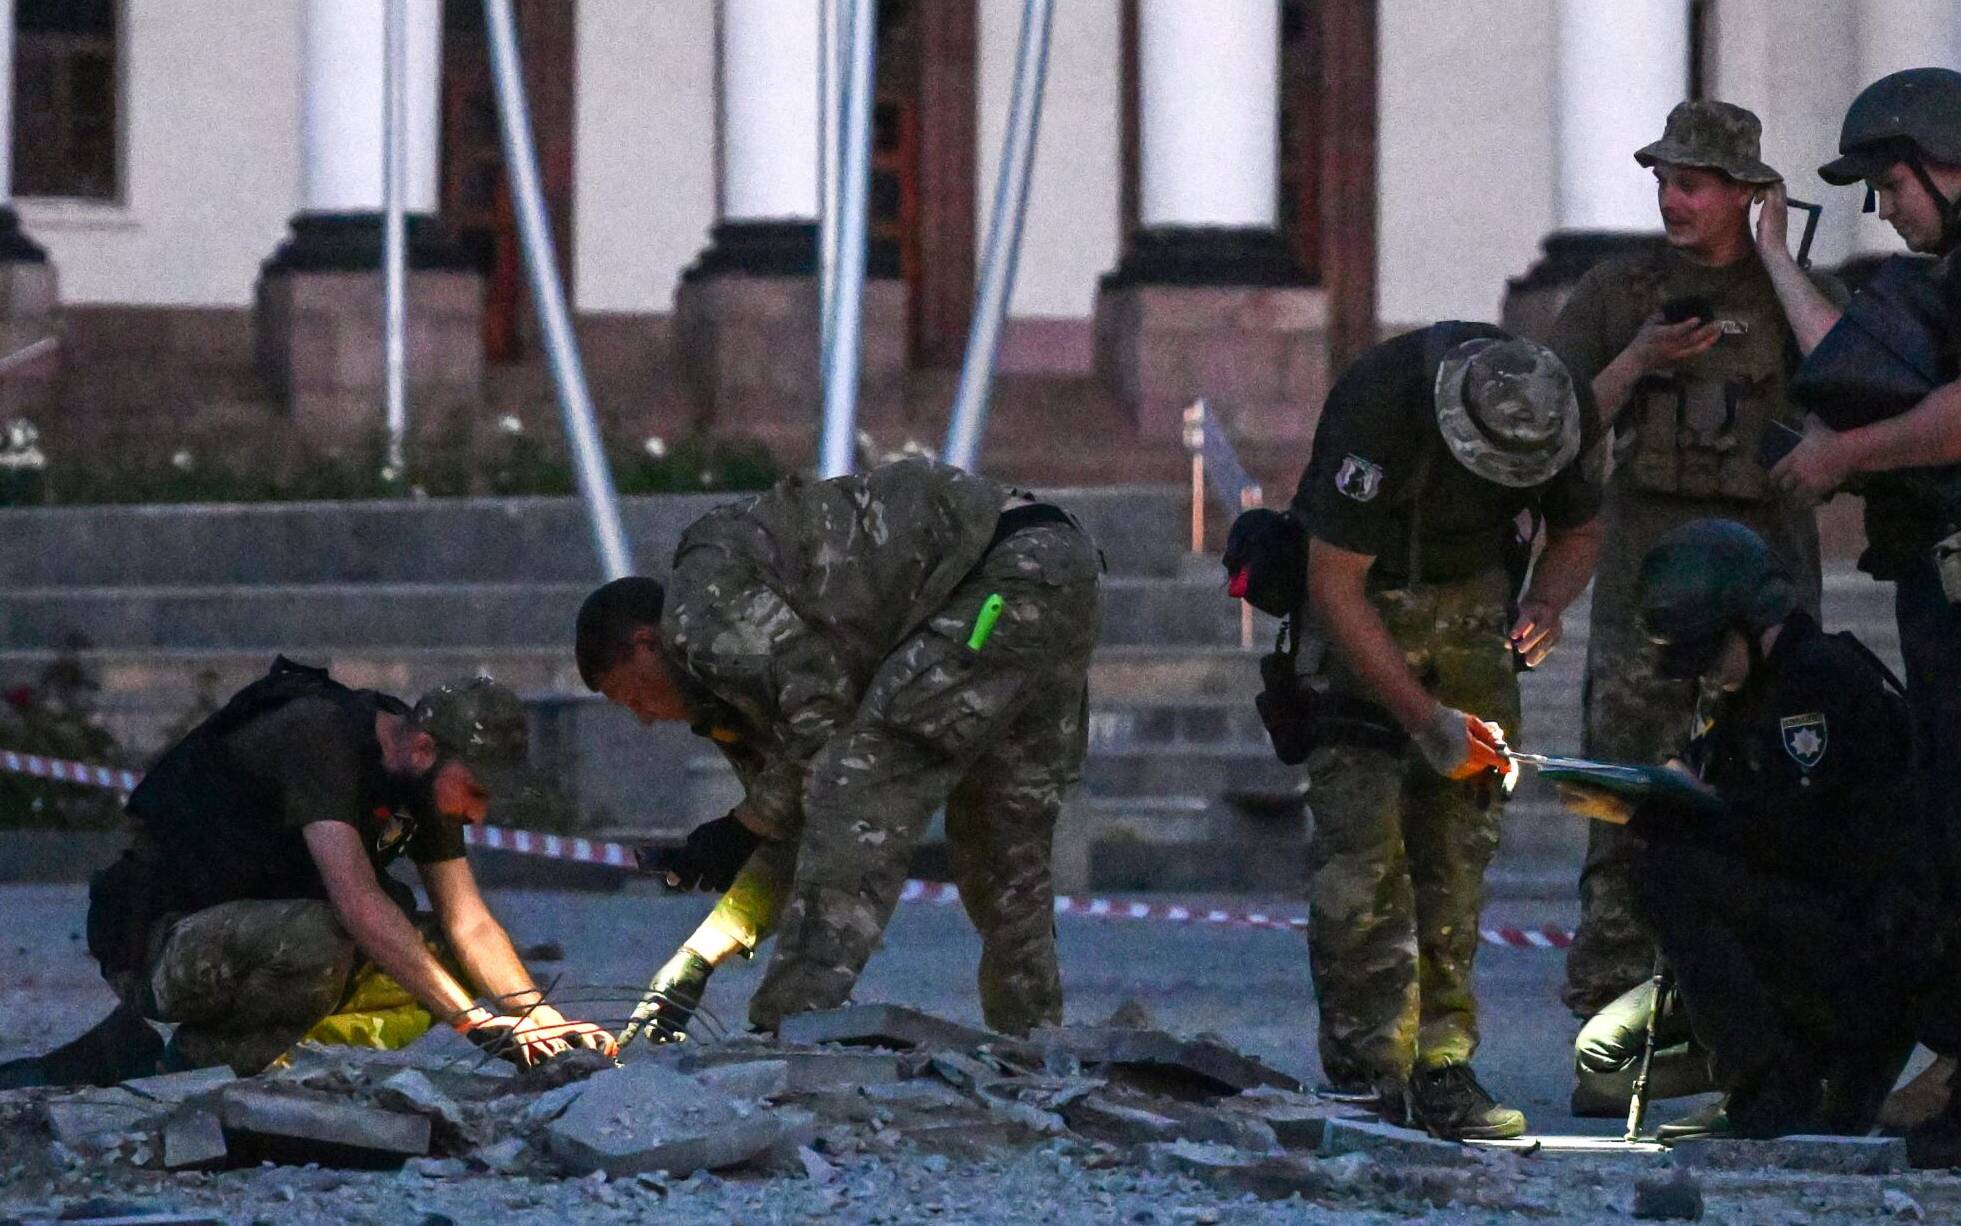 Ukrainian servicemen inspect the damaged ground of a street after an air strike hit the Myru (Peace) square in front of the Palace of Culture and Technology and the City Hall in the center of Kramatorsk on July 15, 2022, amid the Russian invasion of Ukraine. (Photo by MIGUEL MEDINA / AFP)